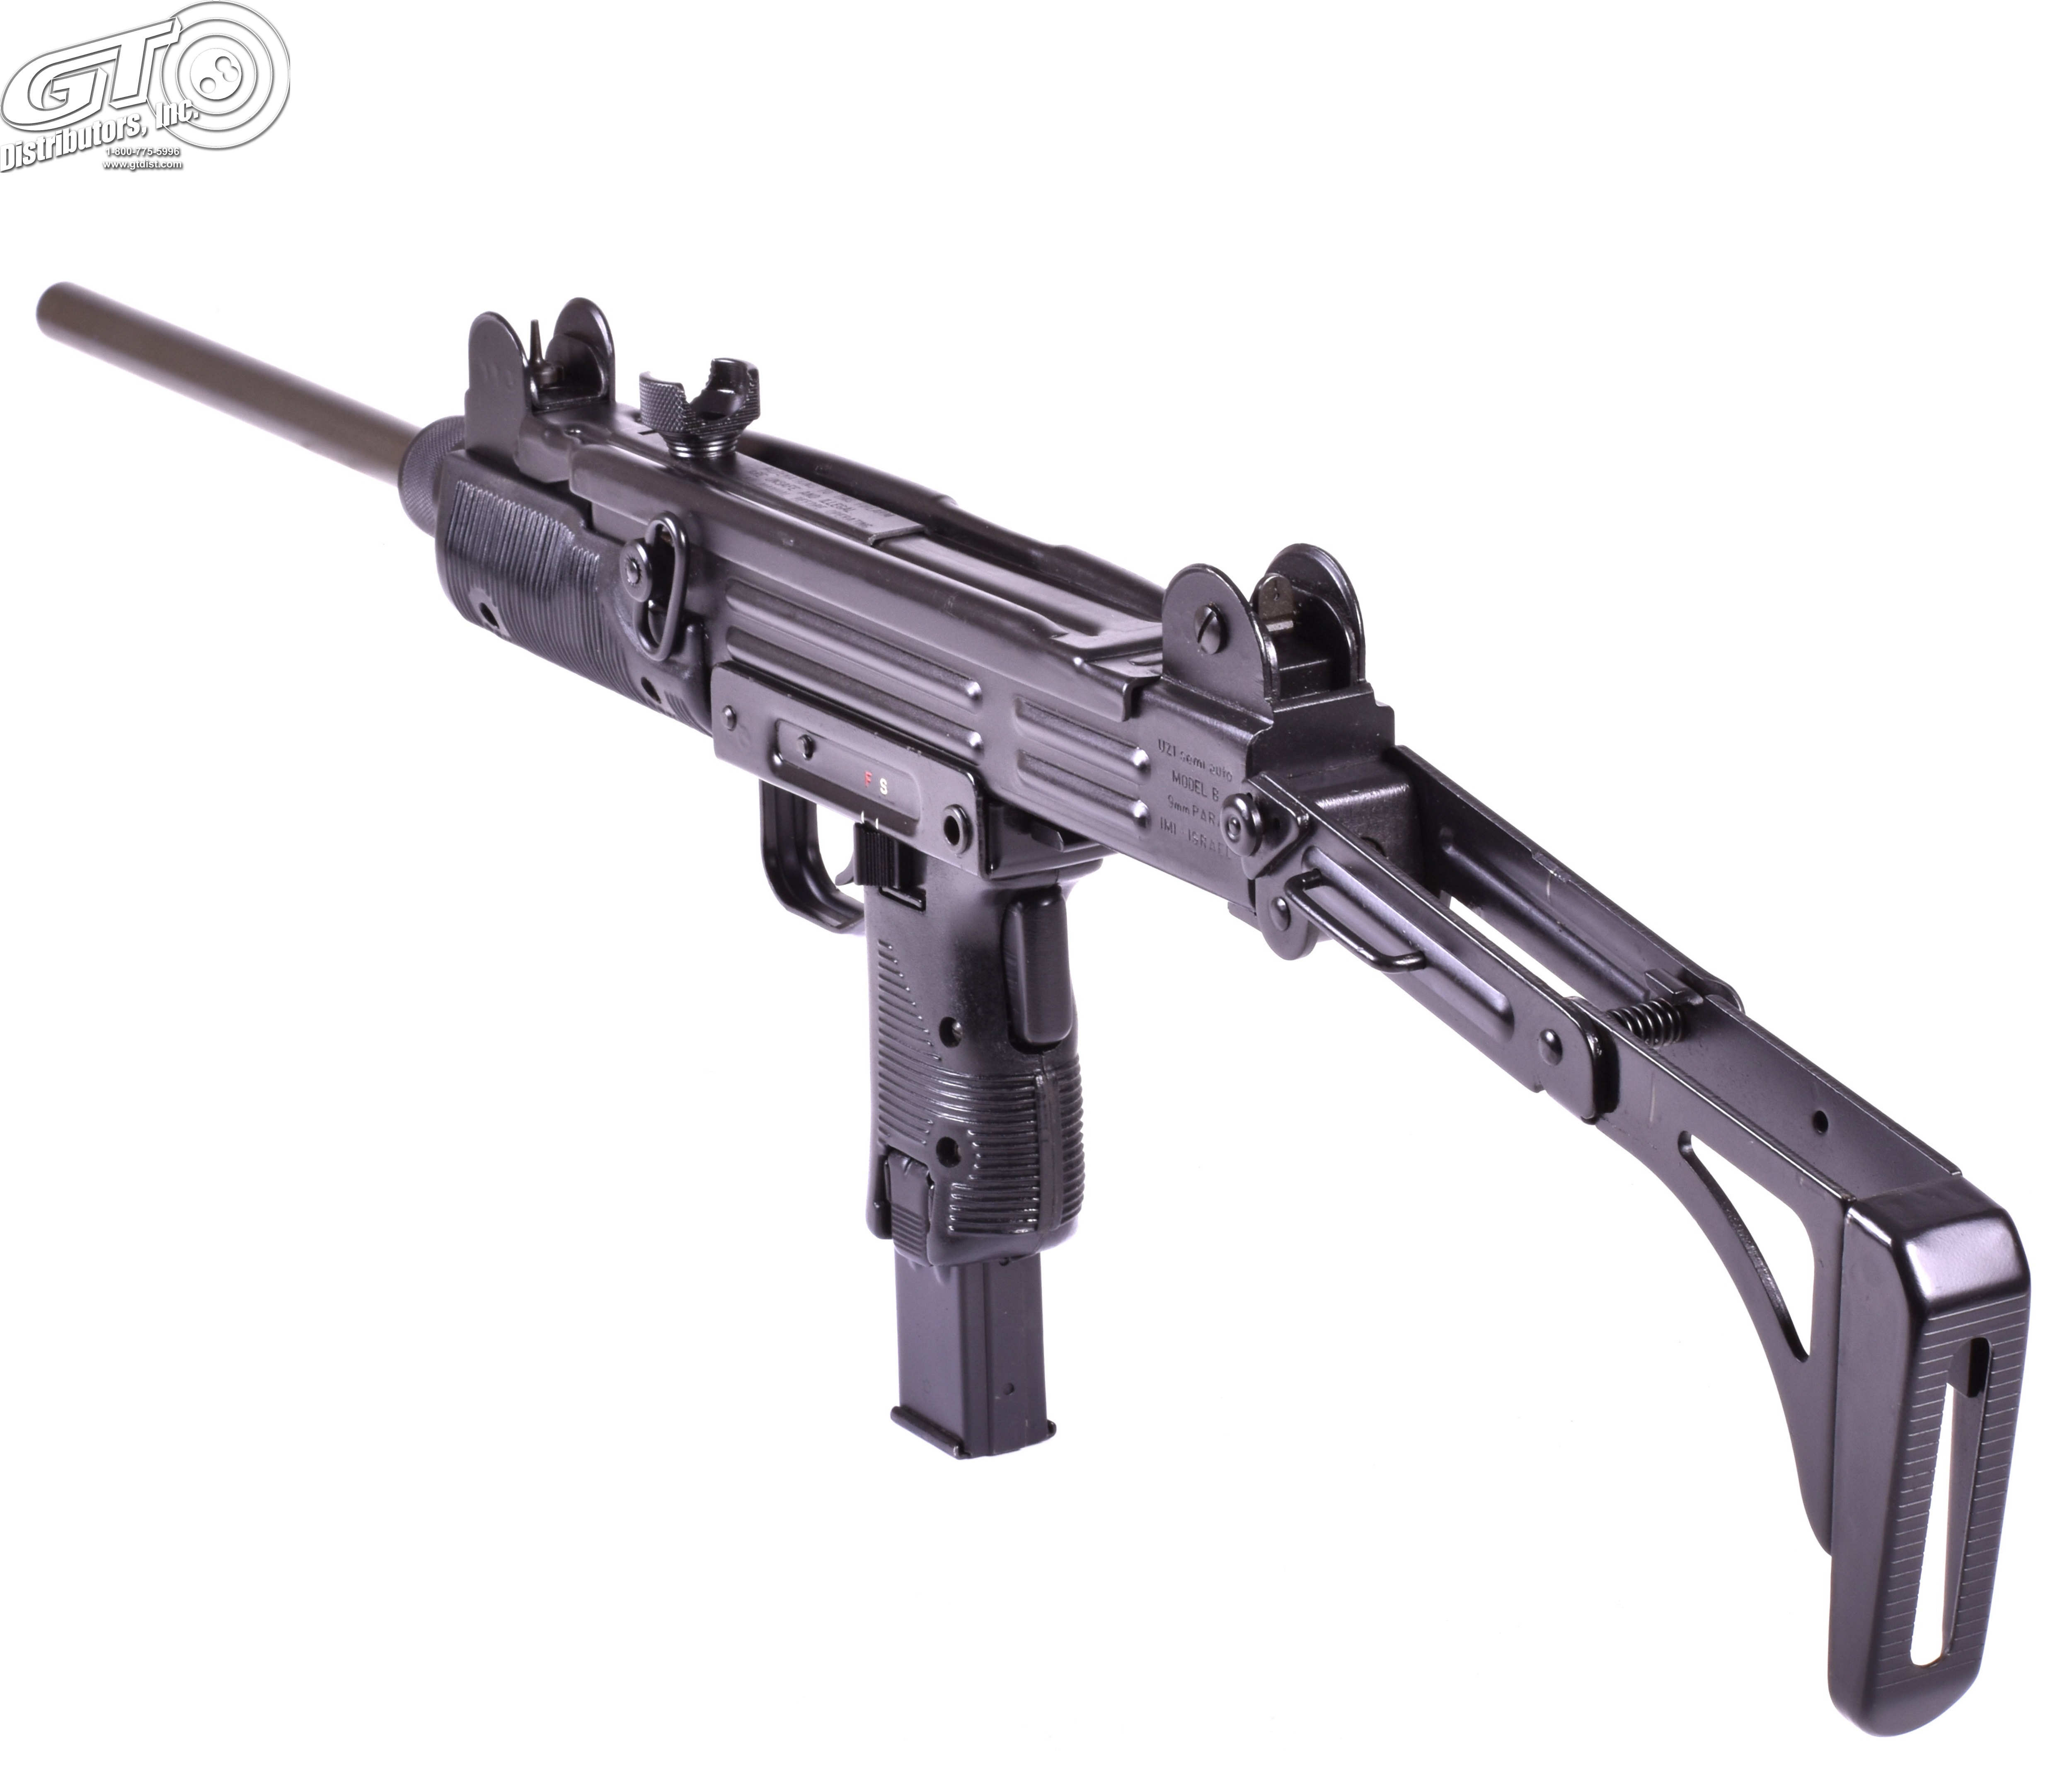 Action Arms Uzi Serial Number Lookup